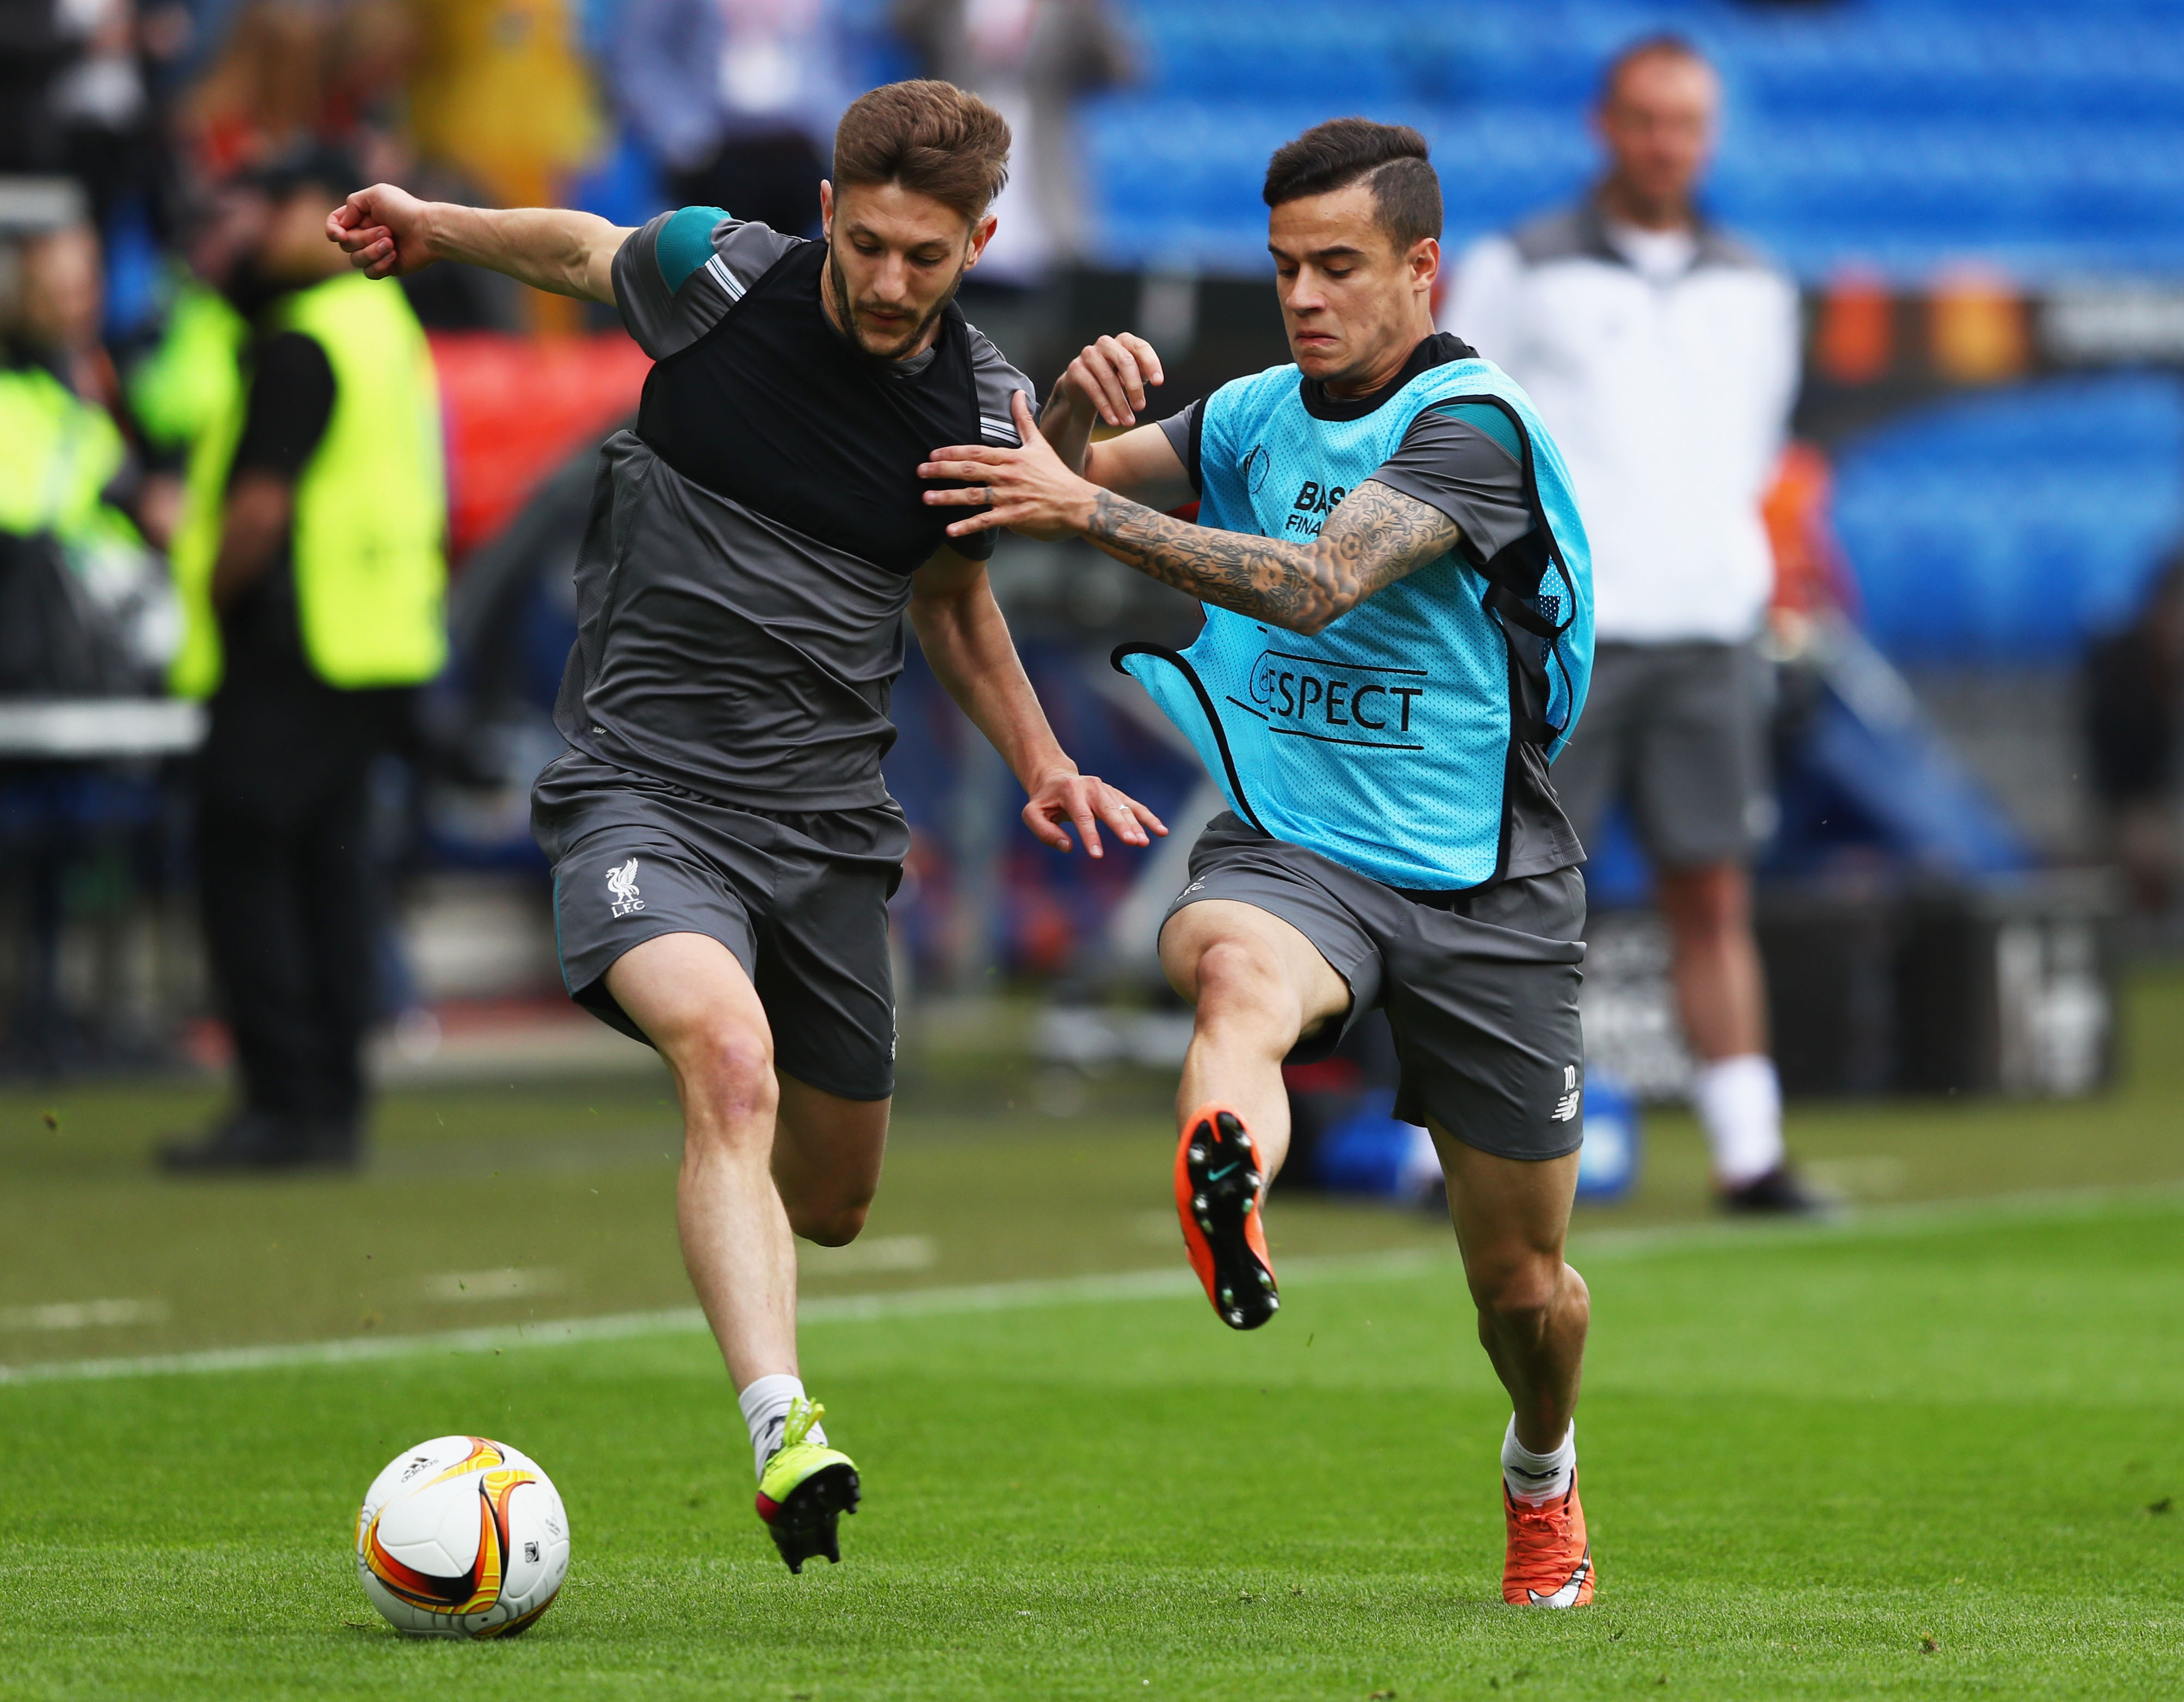 BASEL, SWITZERLAND - MAY 17: Adam Lallana of Liverpool challenges for the ball with Philippe Coutinho during a Liverpool training session on the eve of the UEFA Europa League Final against Sevilla at St. Jakob-Park on May 17, 2016 in Basel, Switzerland.  (Photo by Michael Steele/Getty Images)